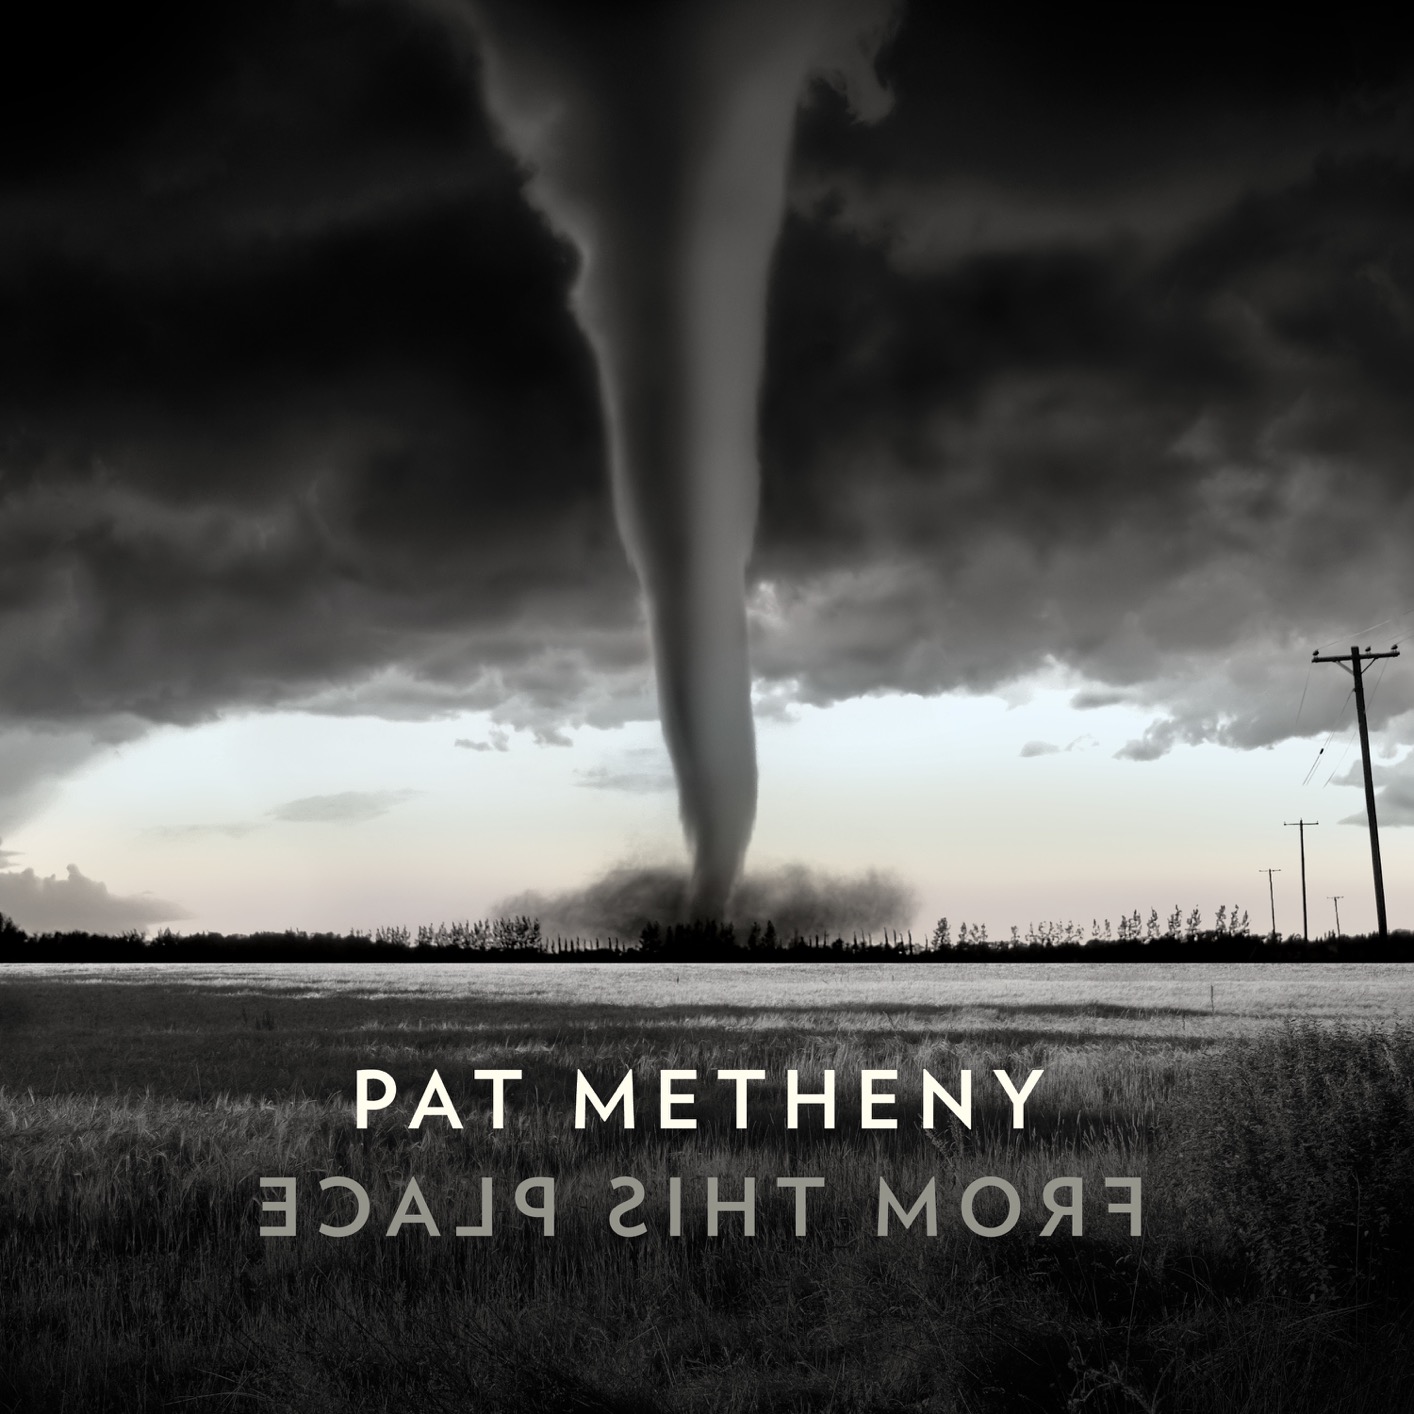 Pat Metheny - From This Place (2020) [FLAC 24bit/96kHz]